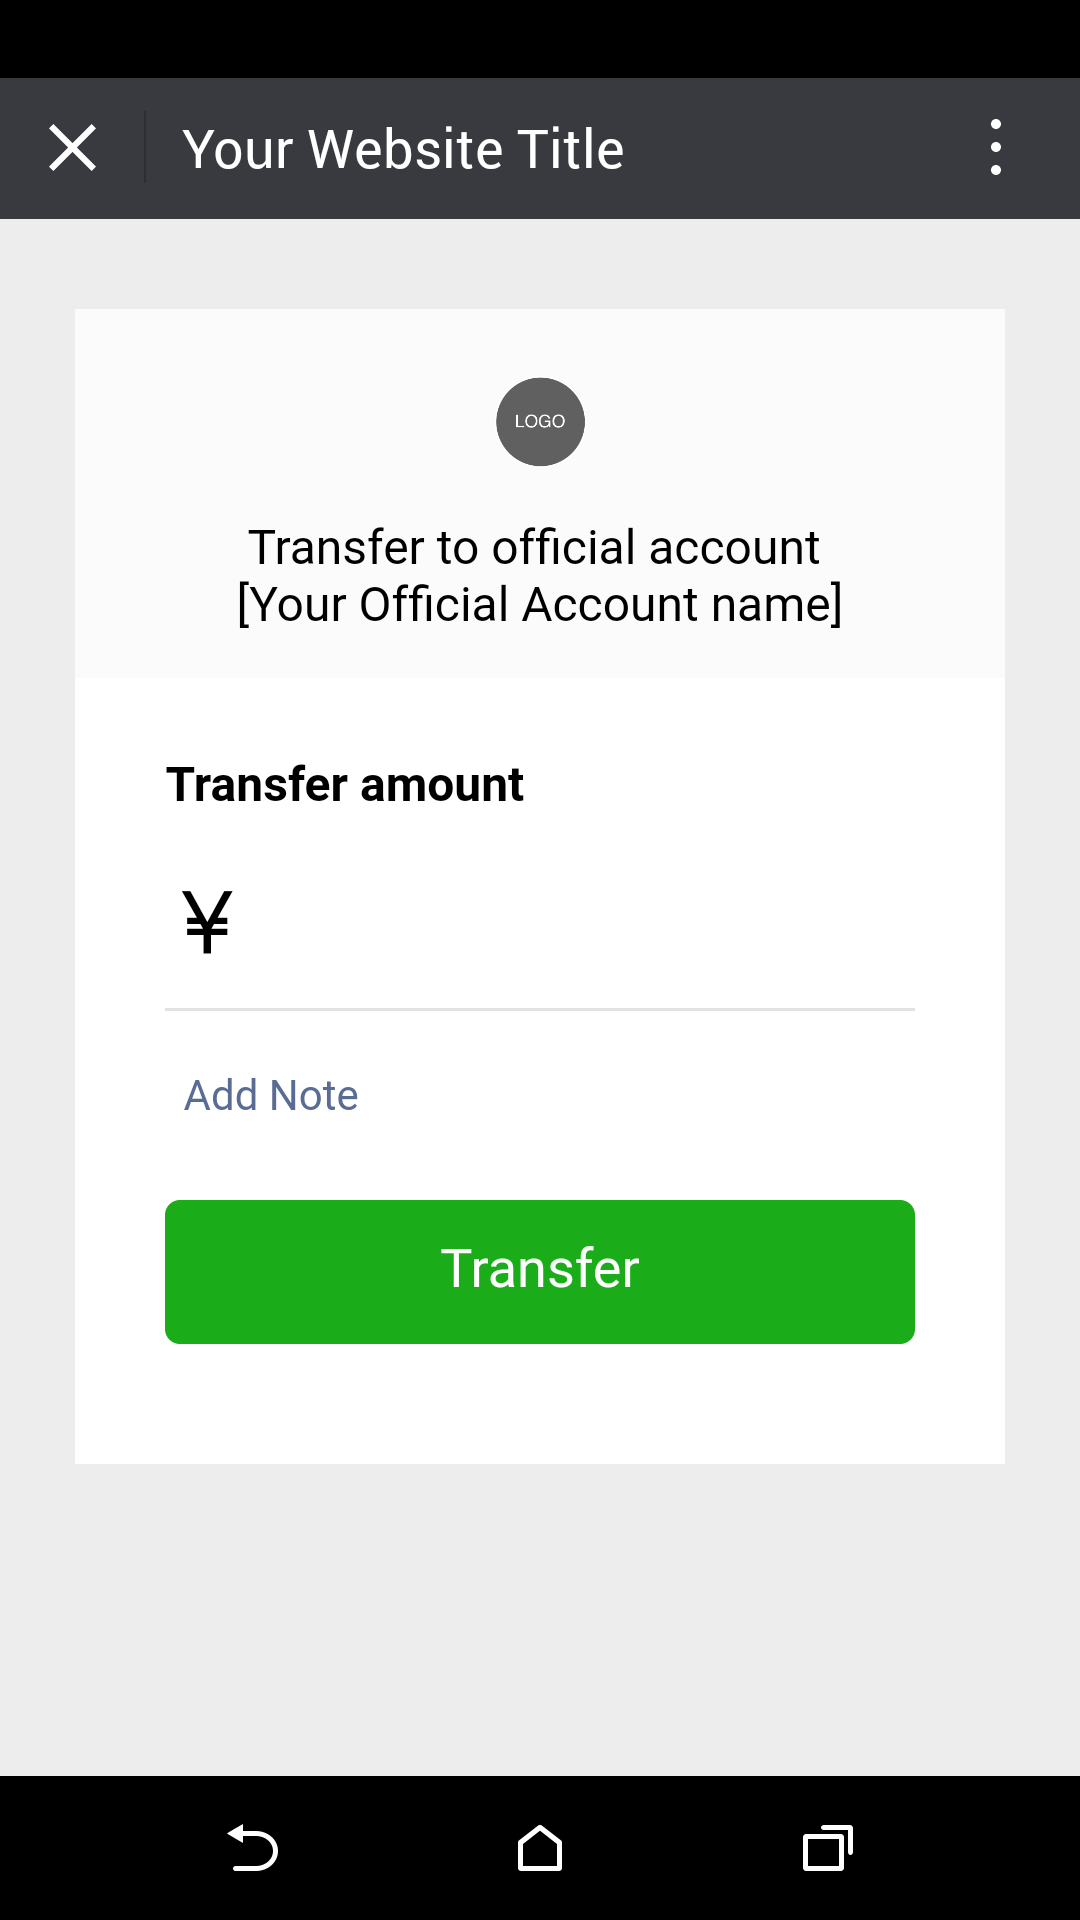 Custom money transfer screen in the WeChat browser after scanning a previouly generated QR code.